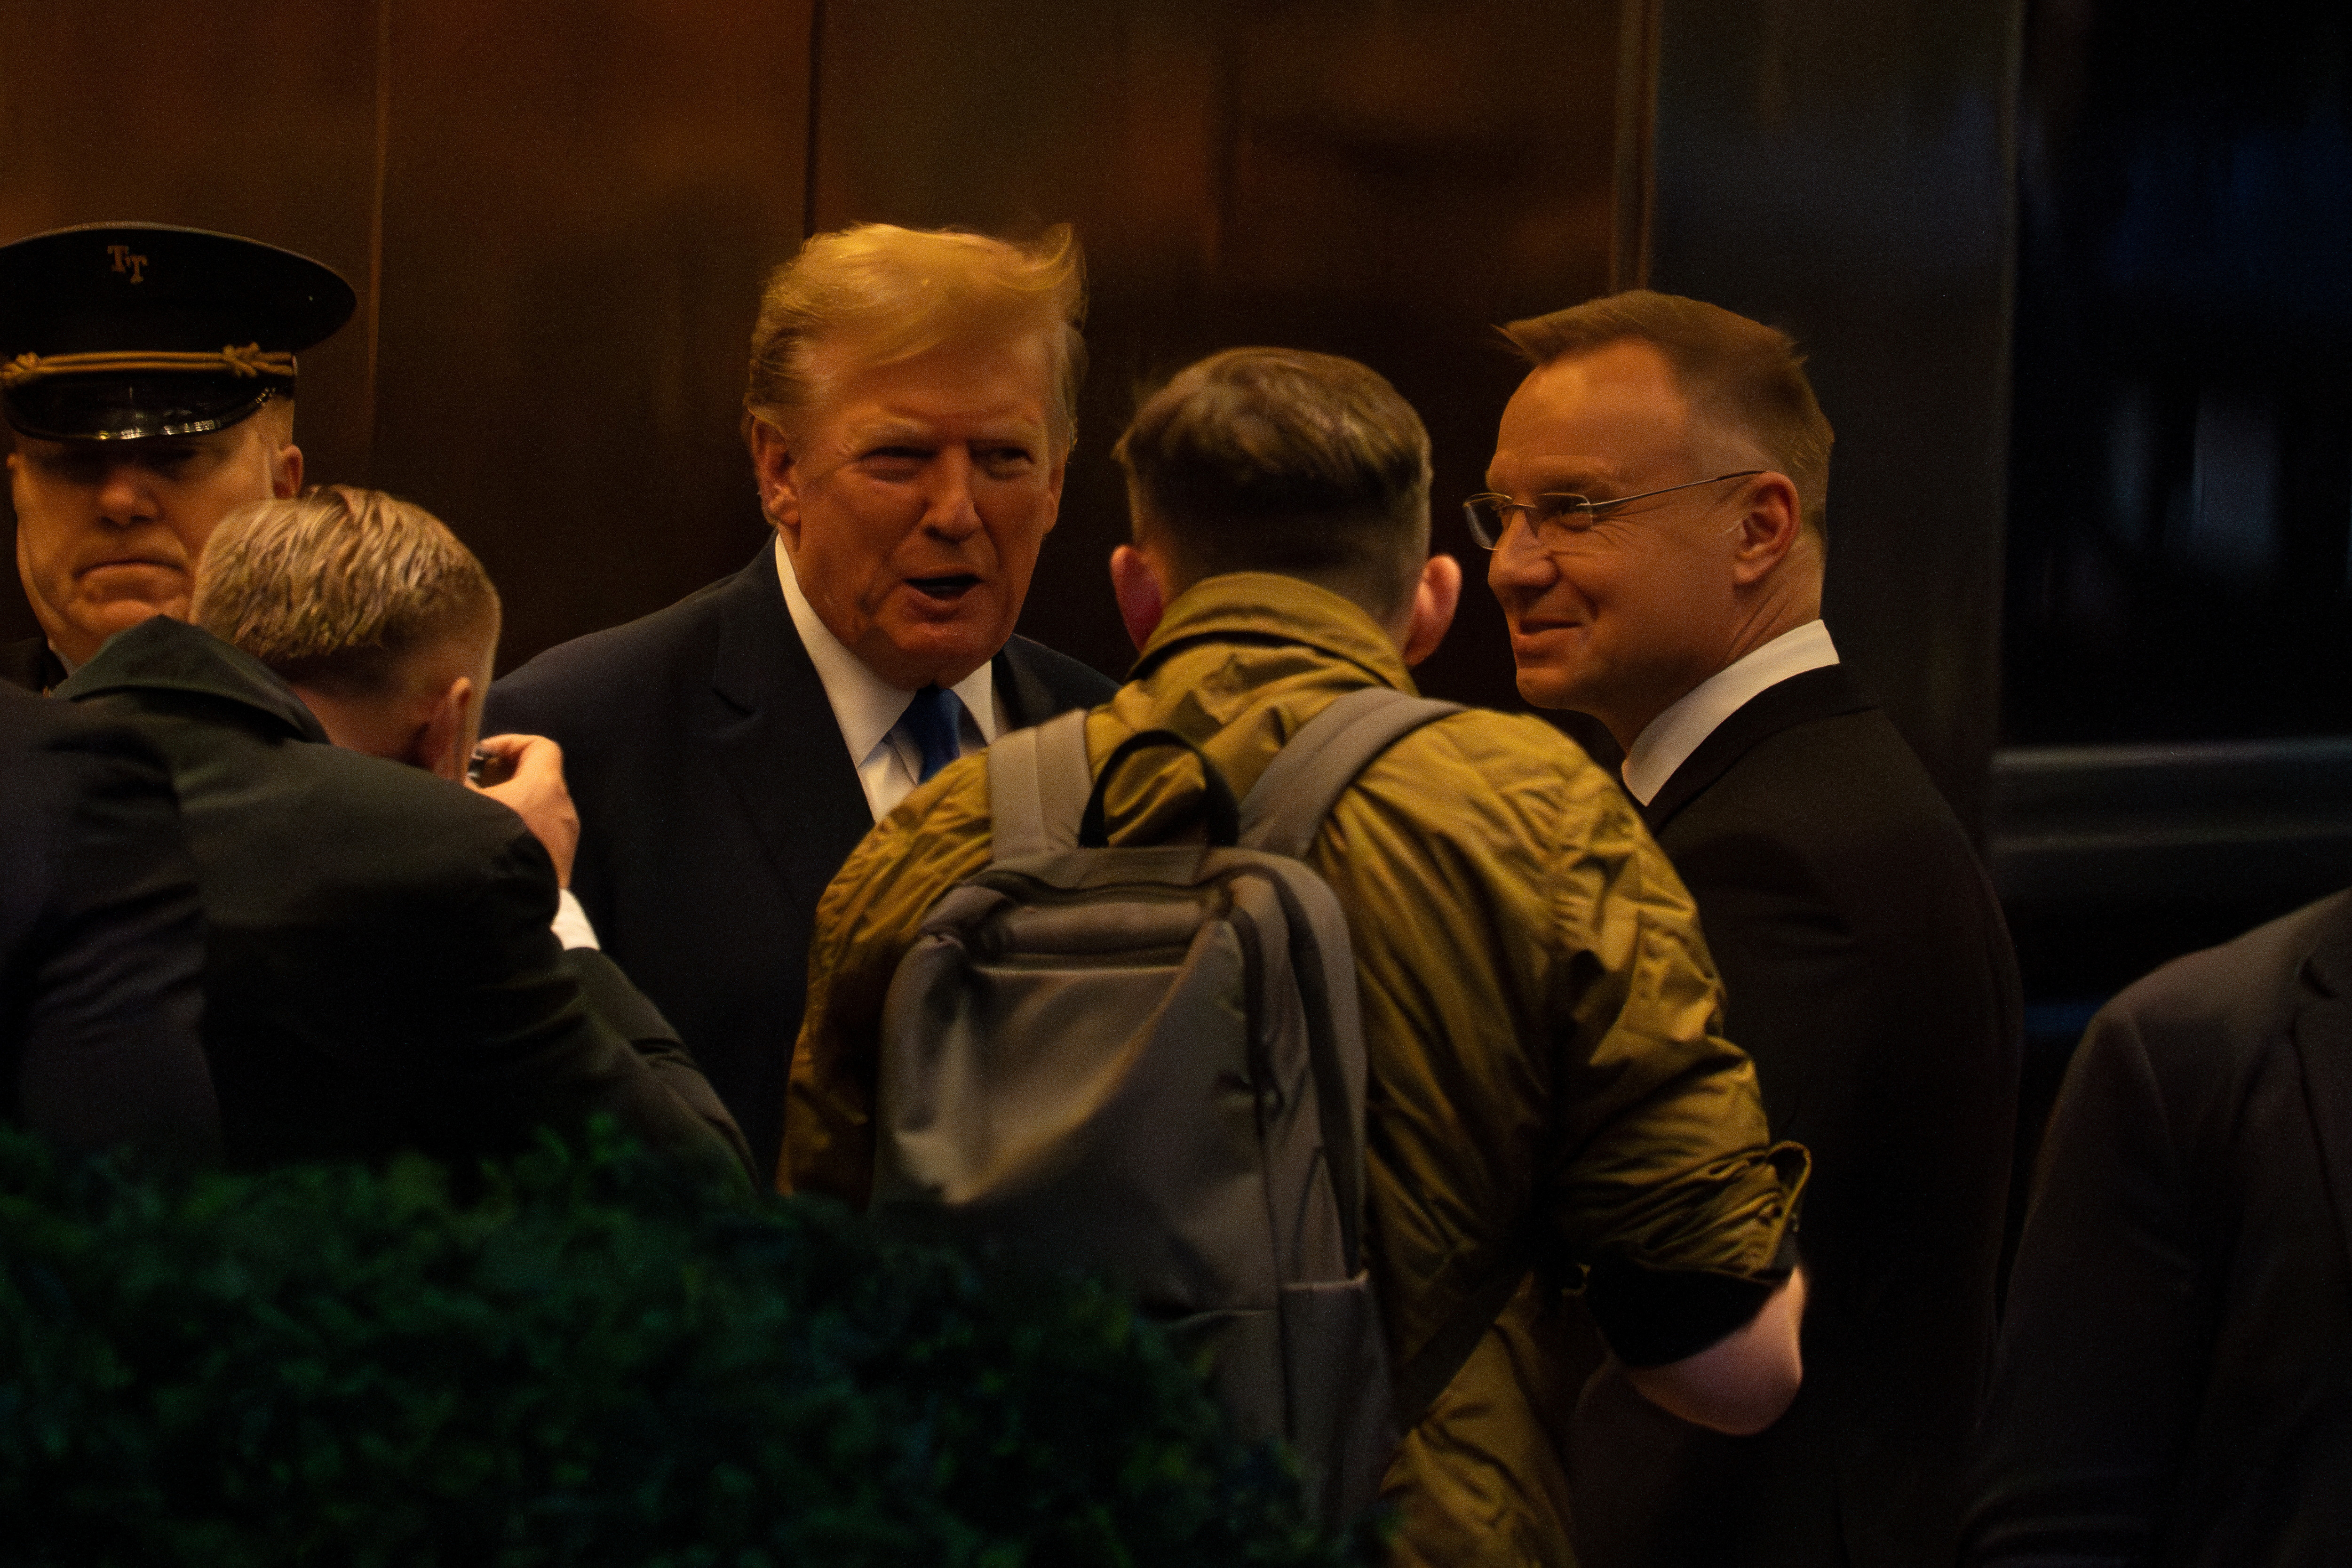 Republican presidential candidate and former U.S. President Donald Trump greets Polish President Andrzej Duda at Trump Tower in New York